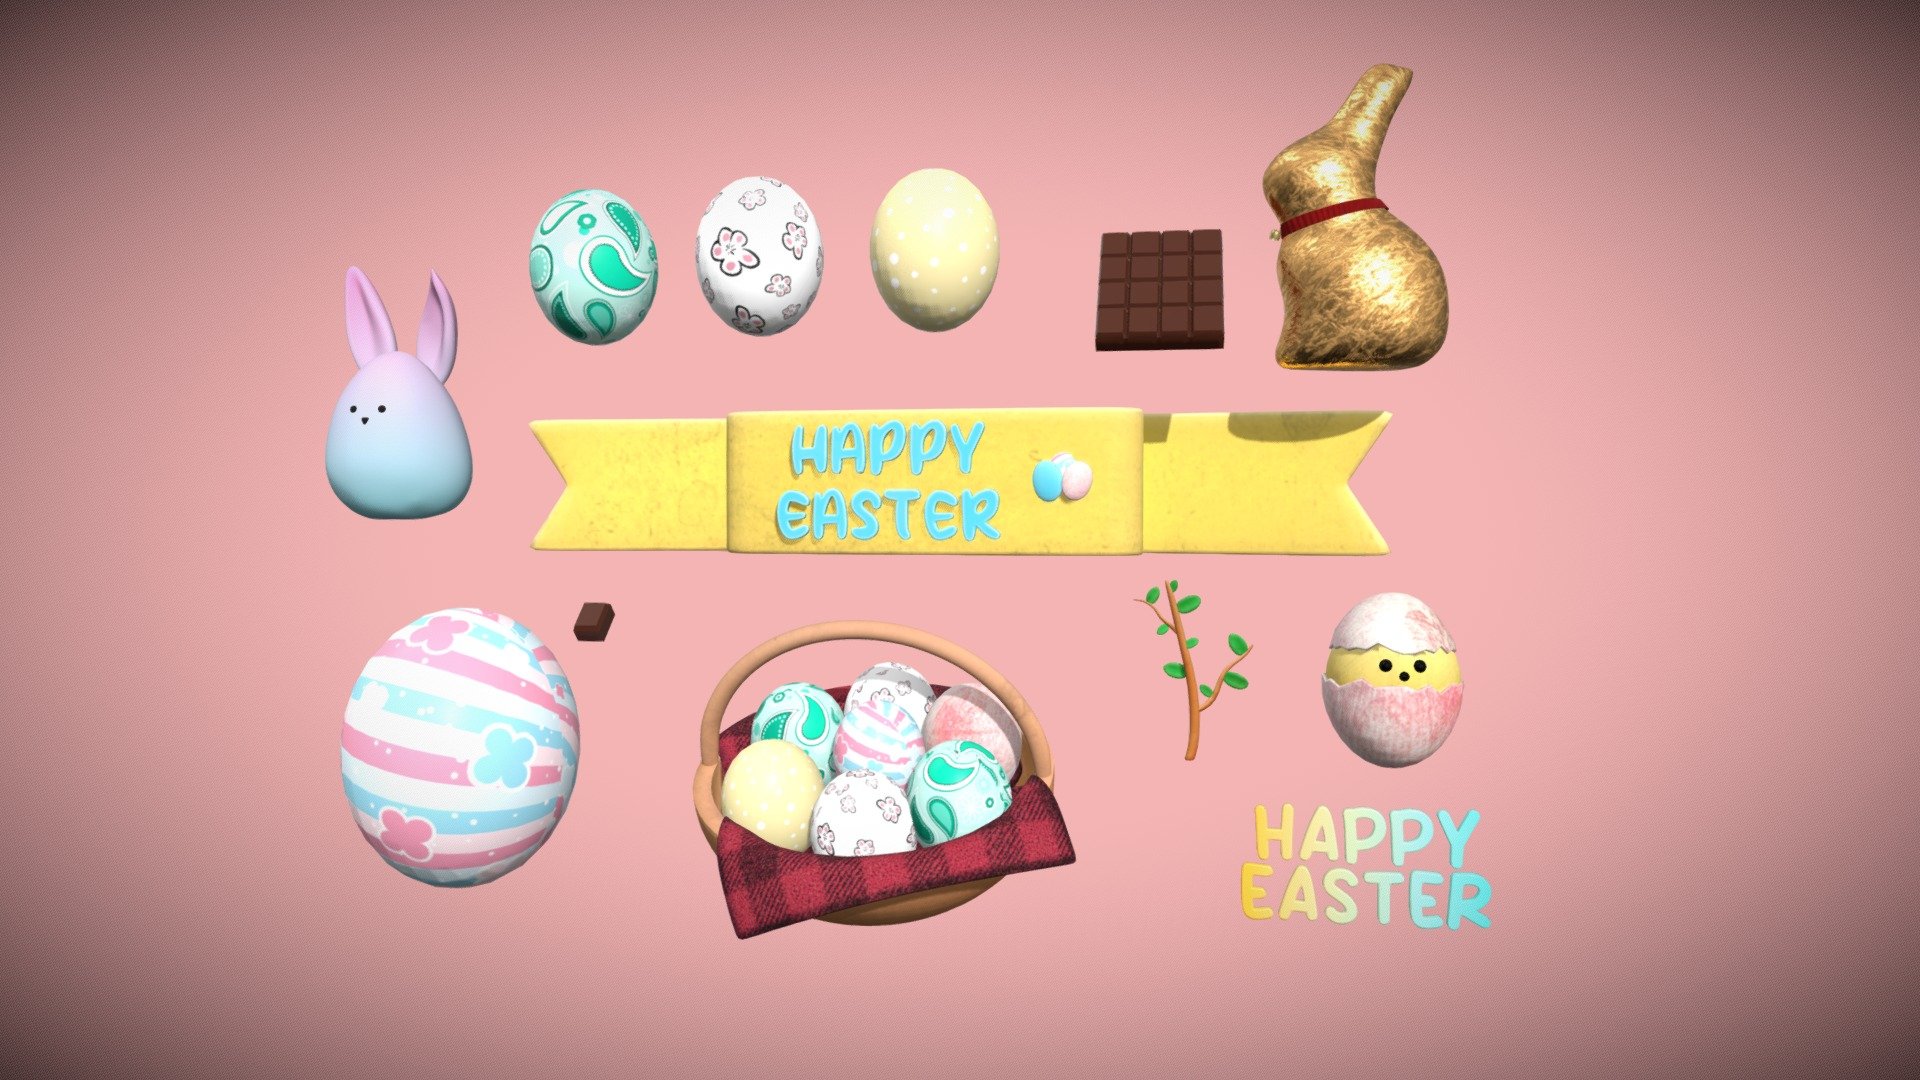 Stylized easter icons created in Blender.

This model is available in the following file formats:




.blend (Blender native format)

.fbx (Autodesk fbx)

.obj (Object file with mtl)

.abc (Alembic)

.dae (Collada)

.stl (Stereolithography)

.glb

The file contains the 3D model and the textures, there is no light preset.
There is a zip file with some renders in PNG format with alpha/transparency.

The objects are exported separately, but the blender file contains all of them.
The model has a non-overlapping UV-Map.
The polygons in the model are mostly Quads. 

Polygons (total)
* Verts 63000
* Faces 62573
* Tris 124924

Included texture maps: Base Color, Metallic, Roughness, Ambient Occlusion, Specular,
OpenGL Normal, DirectX Normal.

The textures are 2048x2048 in PNG 3d model